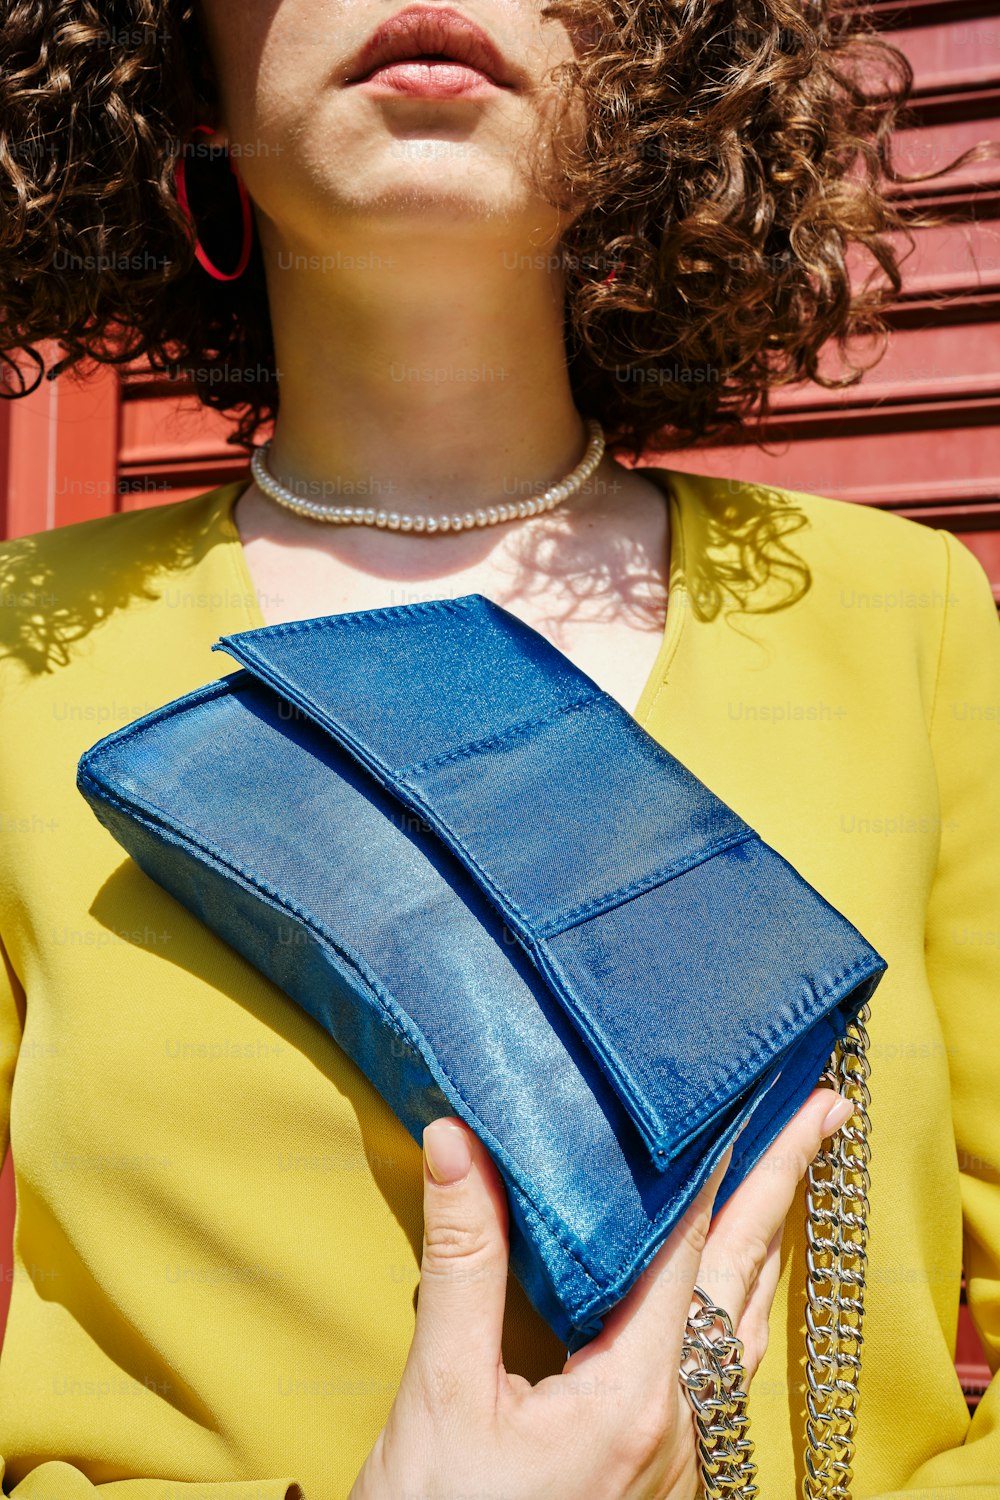 a woman with curly hair holding a blue purse